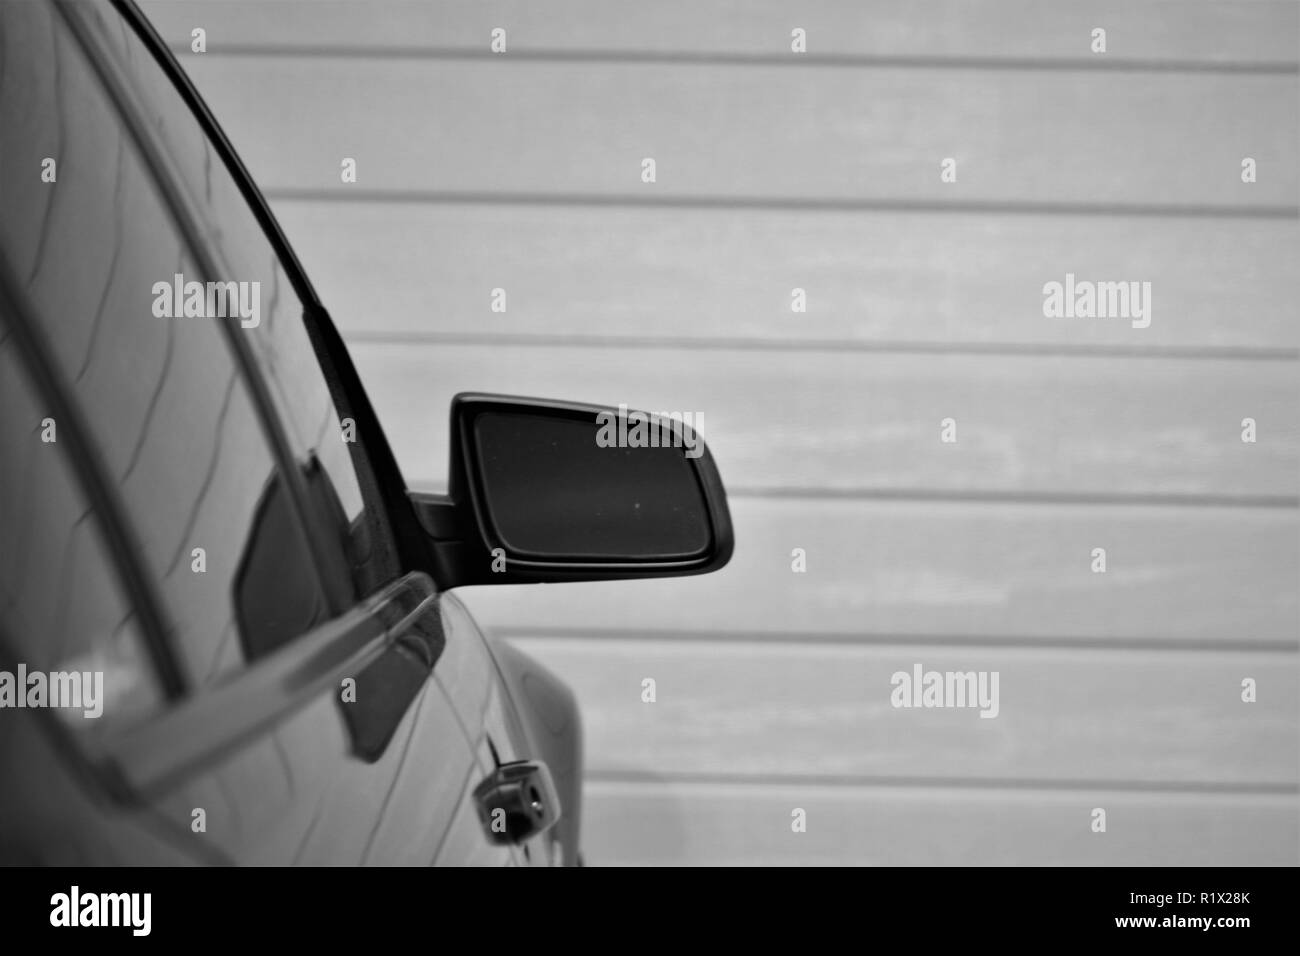 Black and white car mirror in driveway Stock Photo